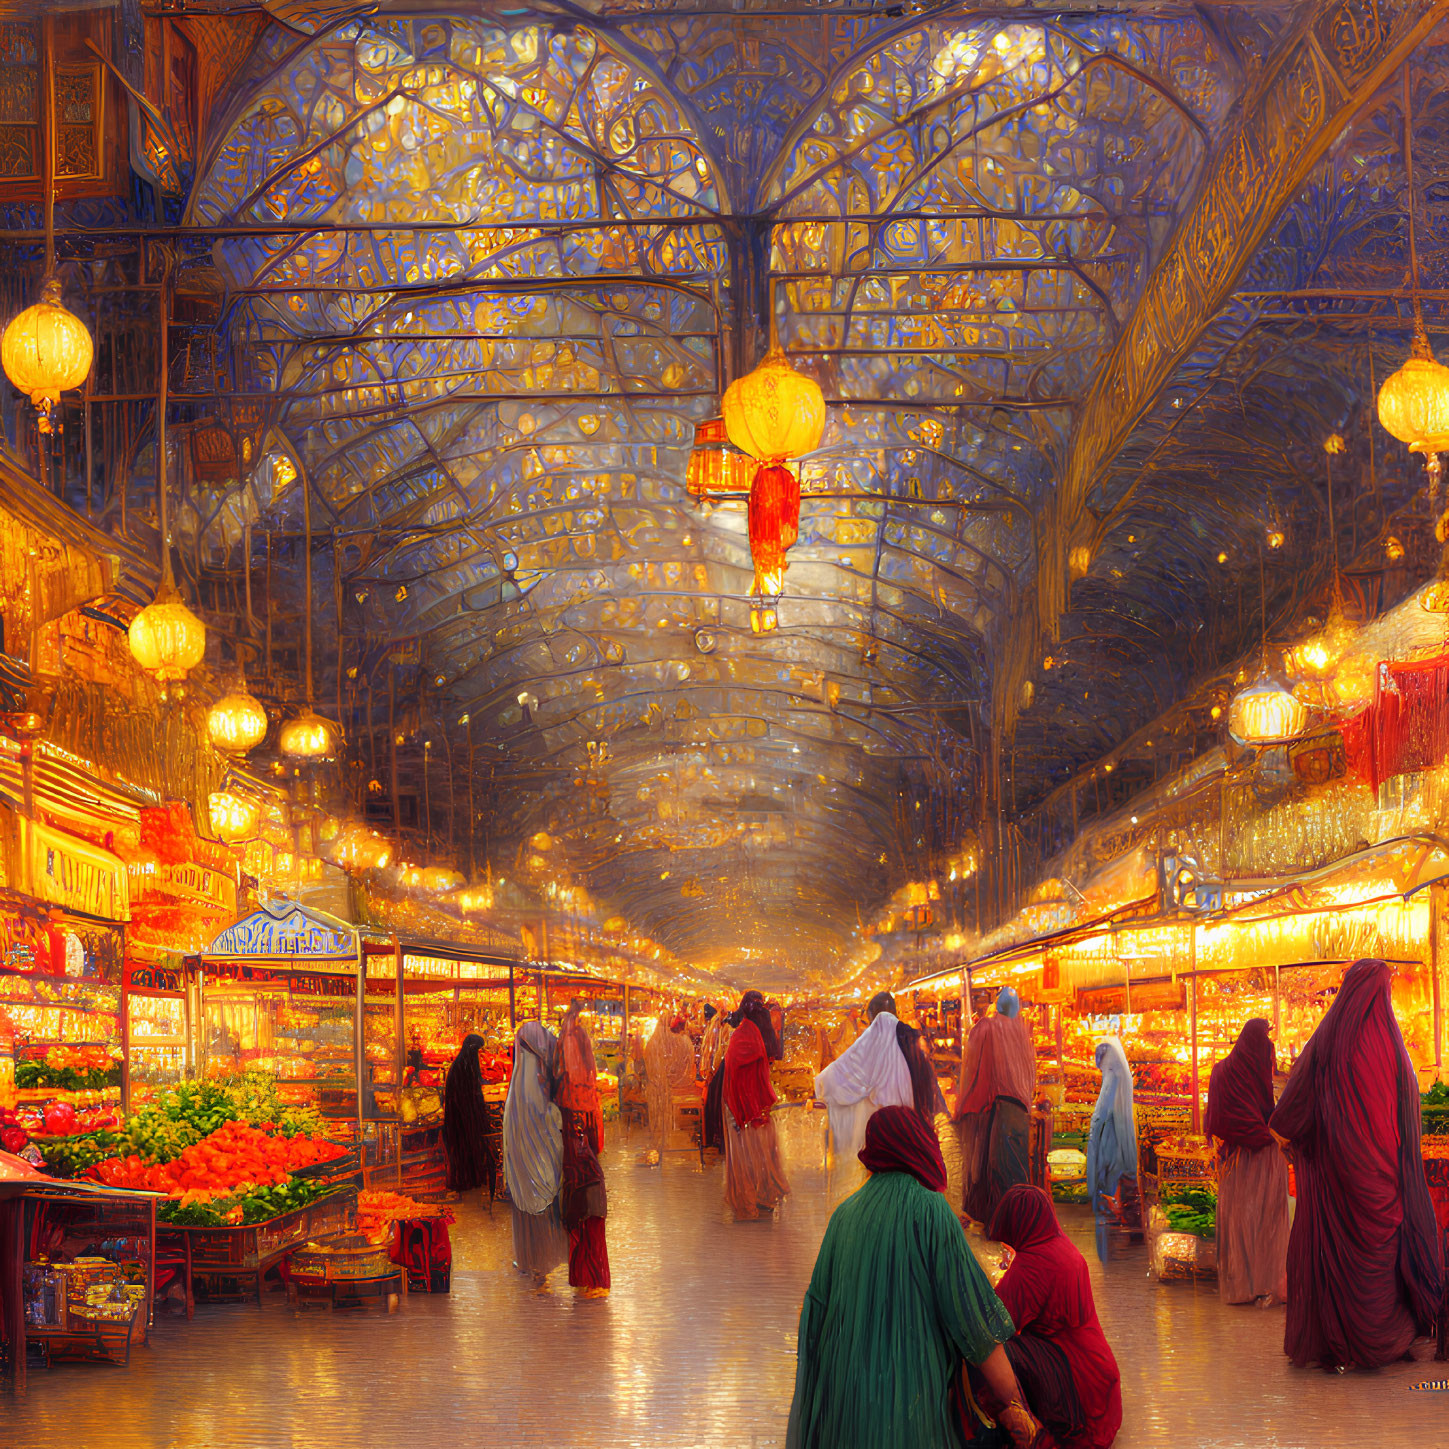 Colorful bazaar scene with hanging lanterns, traditional attire, and bustling stalls.